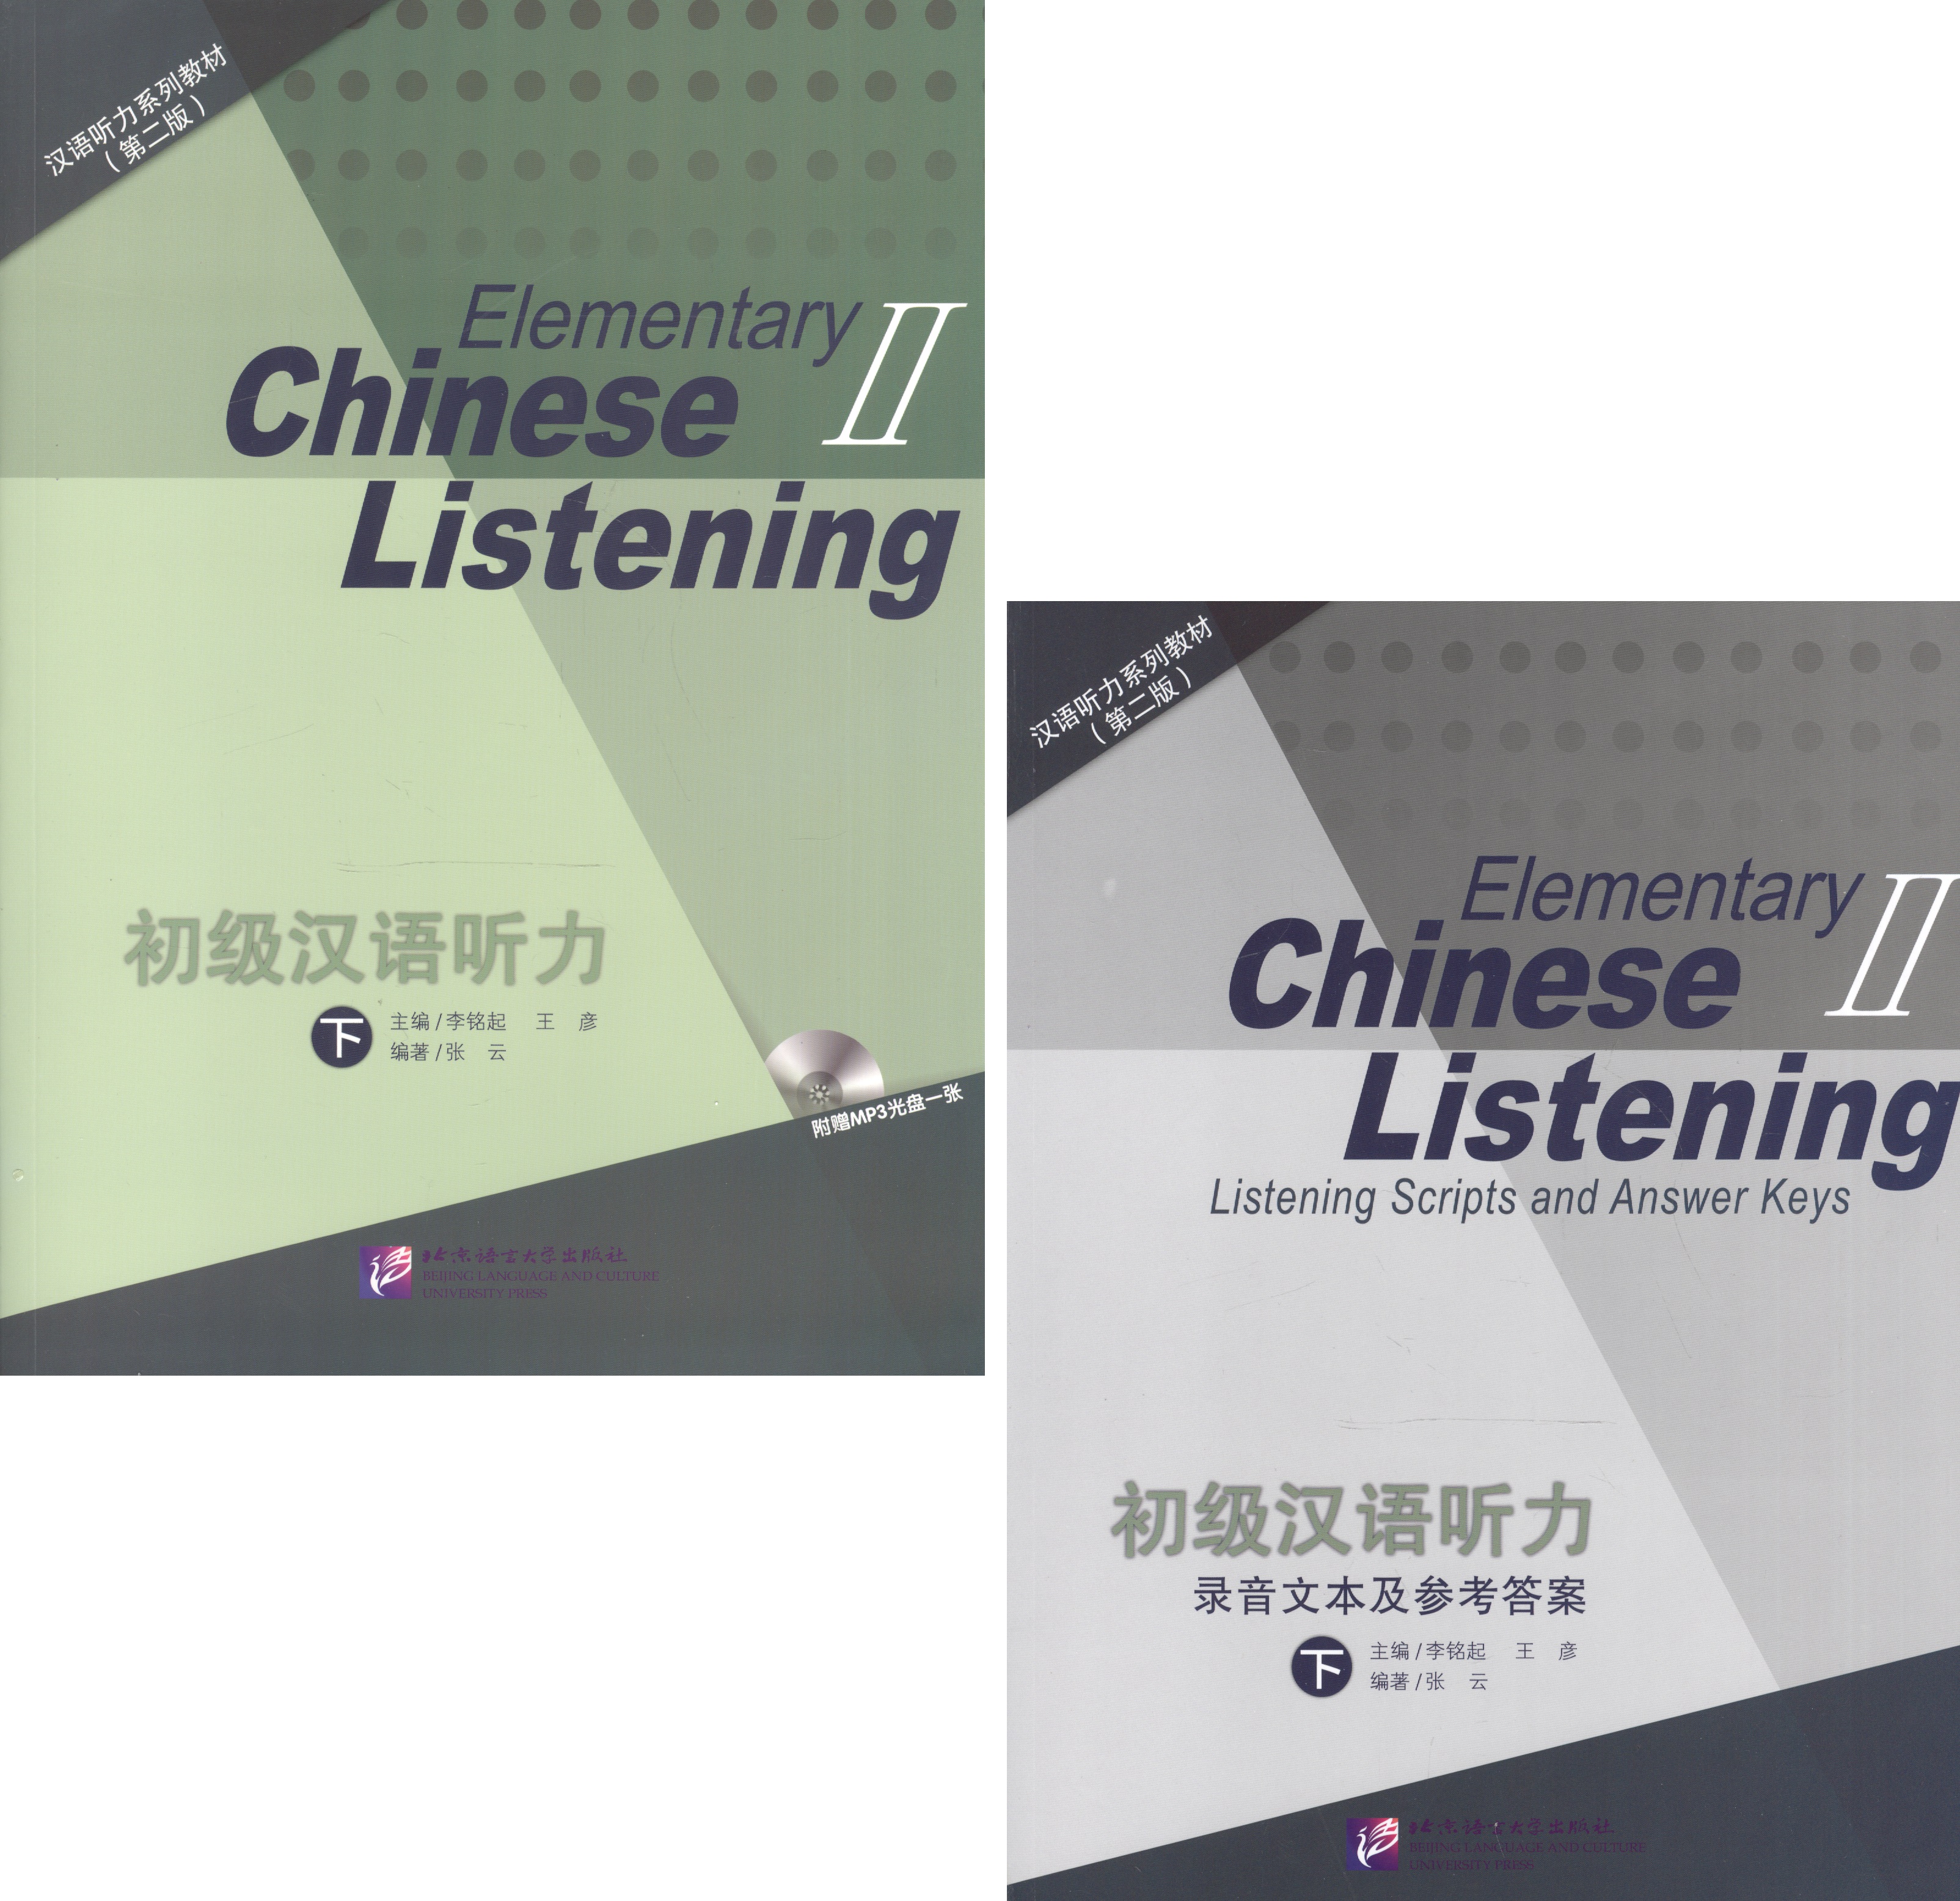 Elementary Chinese Listening II + MP3 CD new chinese book don t choose comfort at the age of hardship chicken soup for the soul inspirational book adult livros chinese